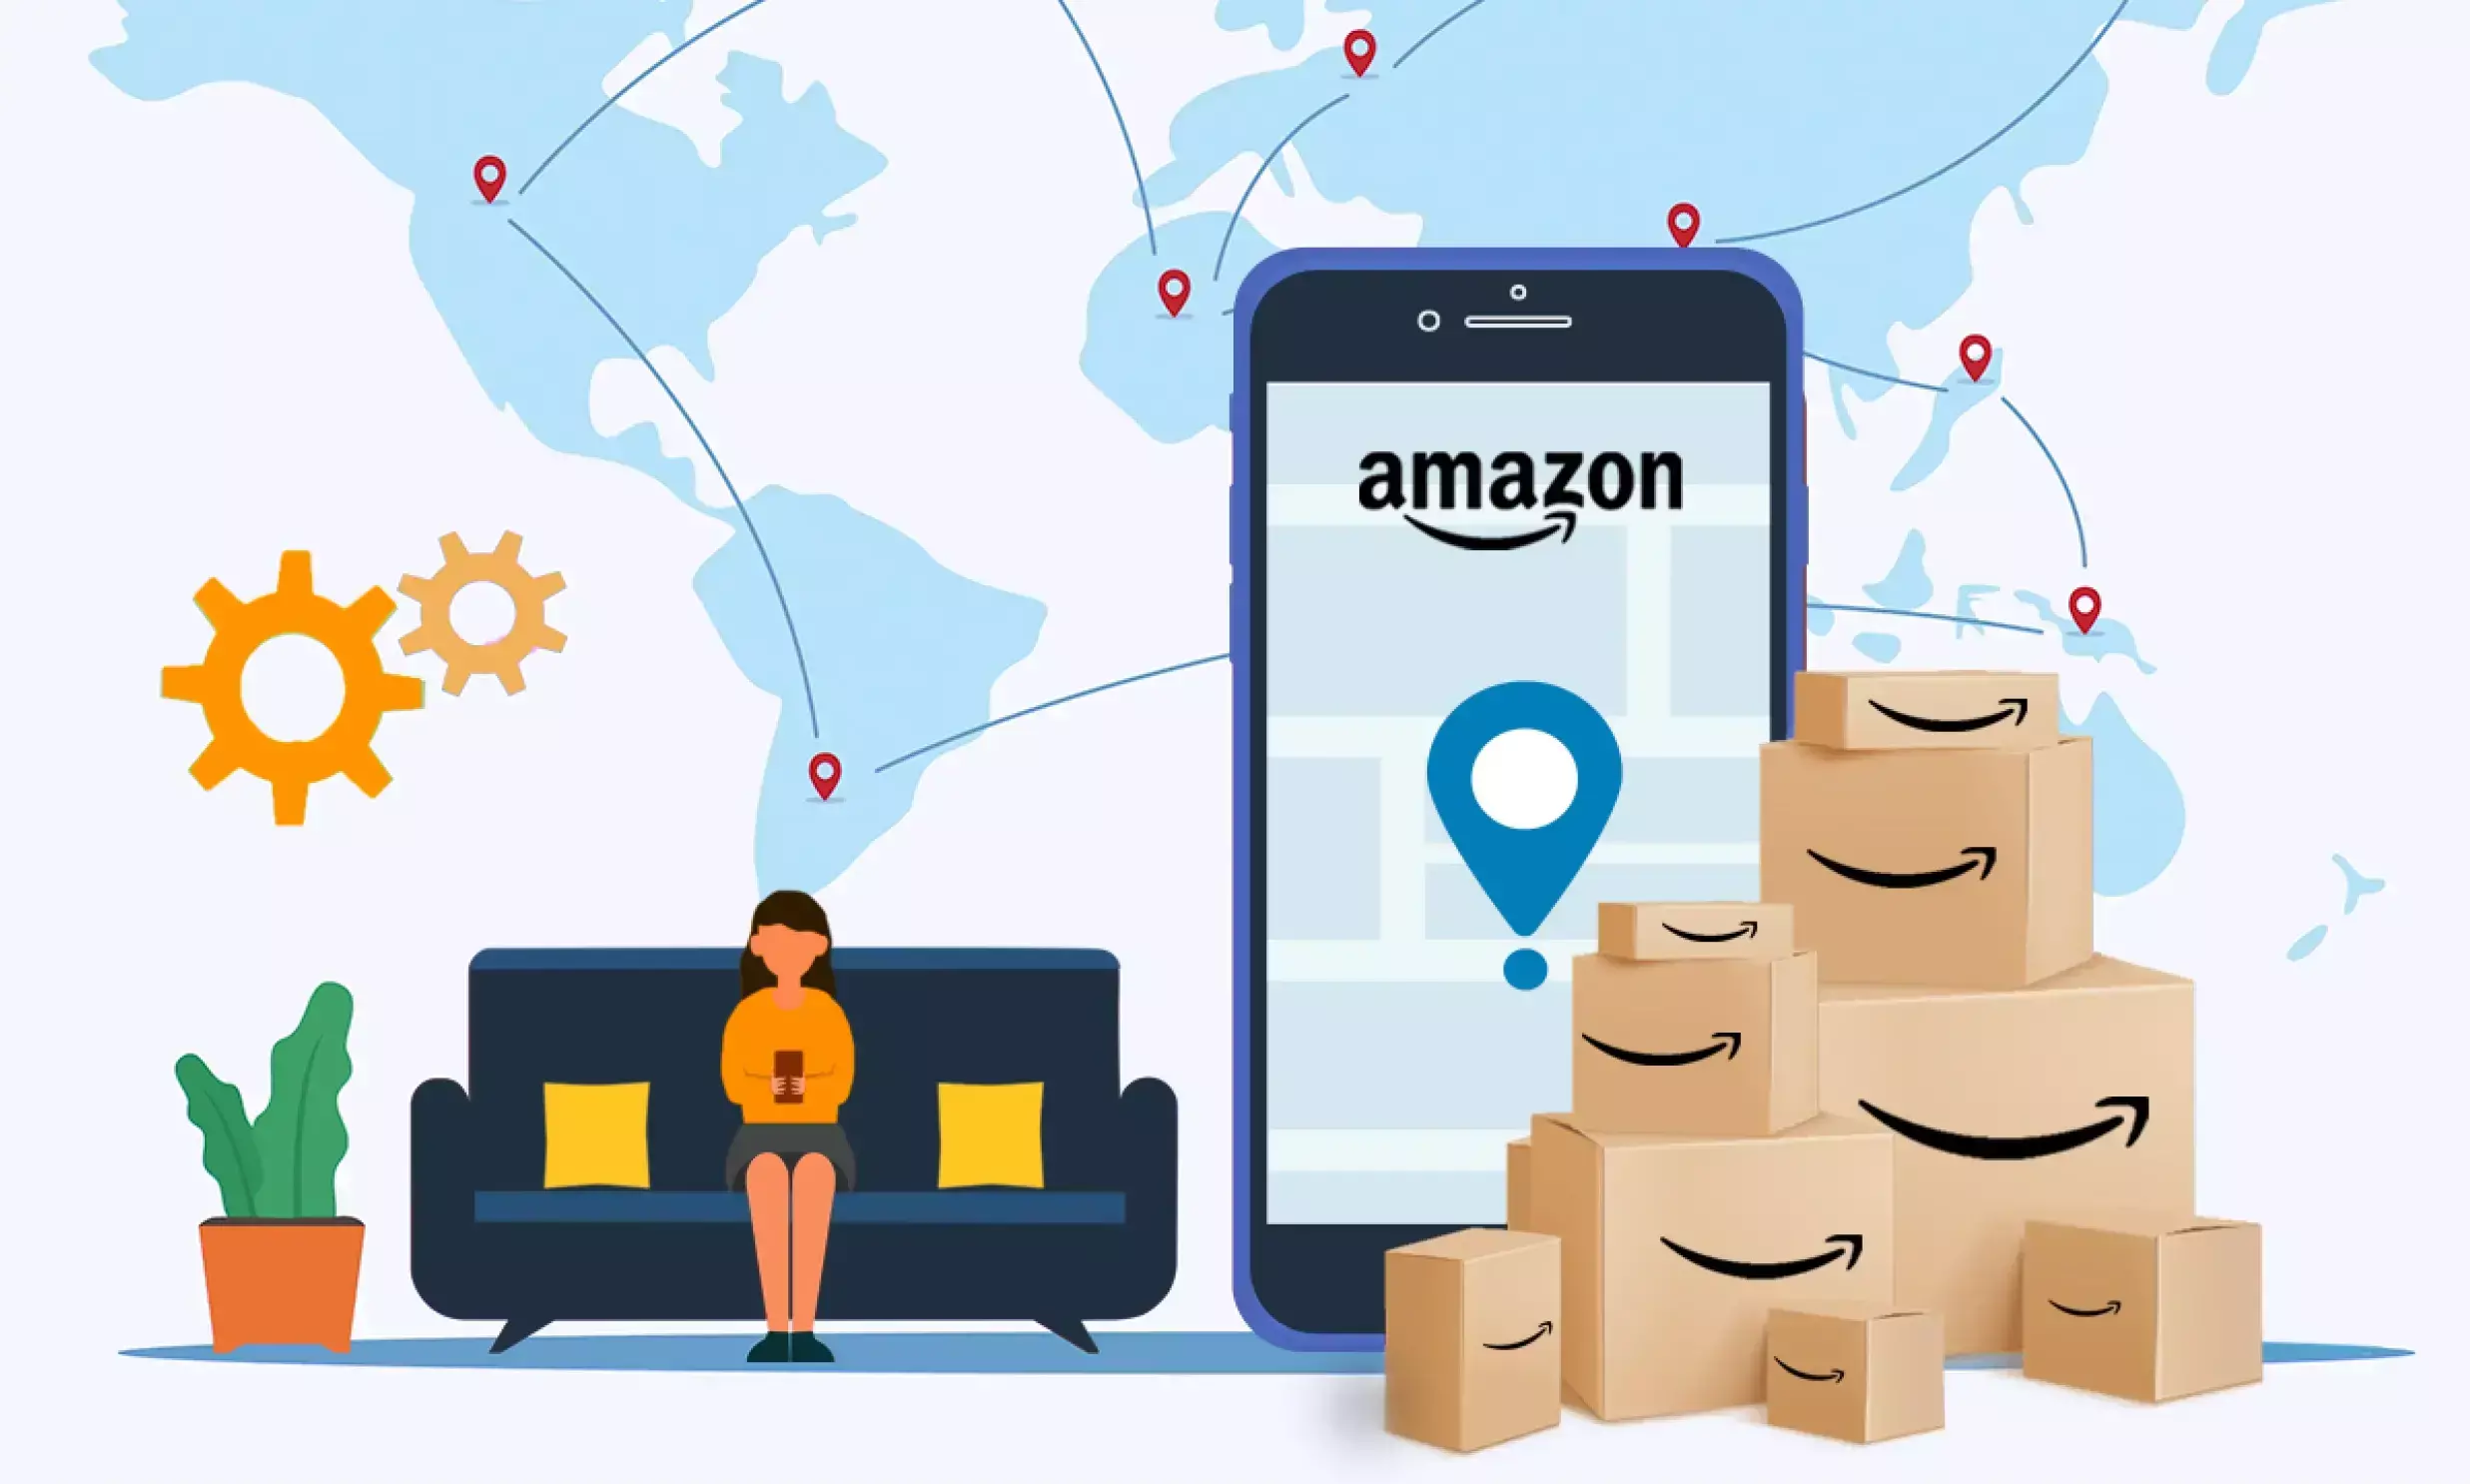 Amazon Global Selling to surpass $8 bn in exports from India in 2023